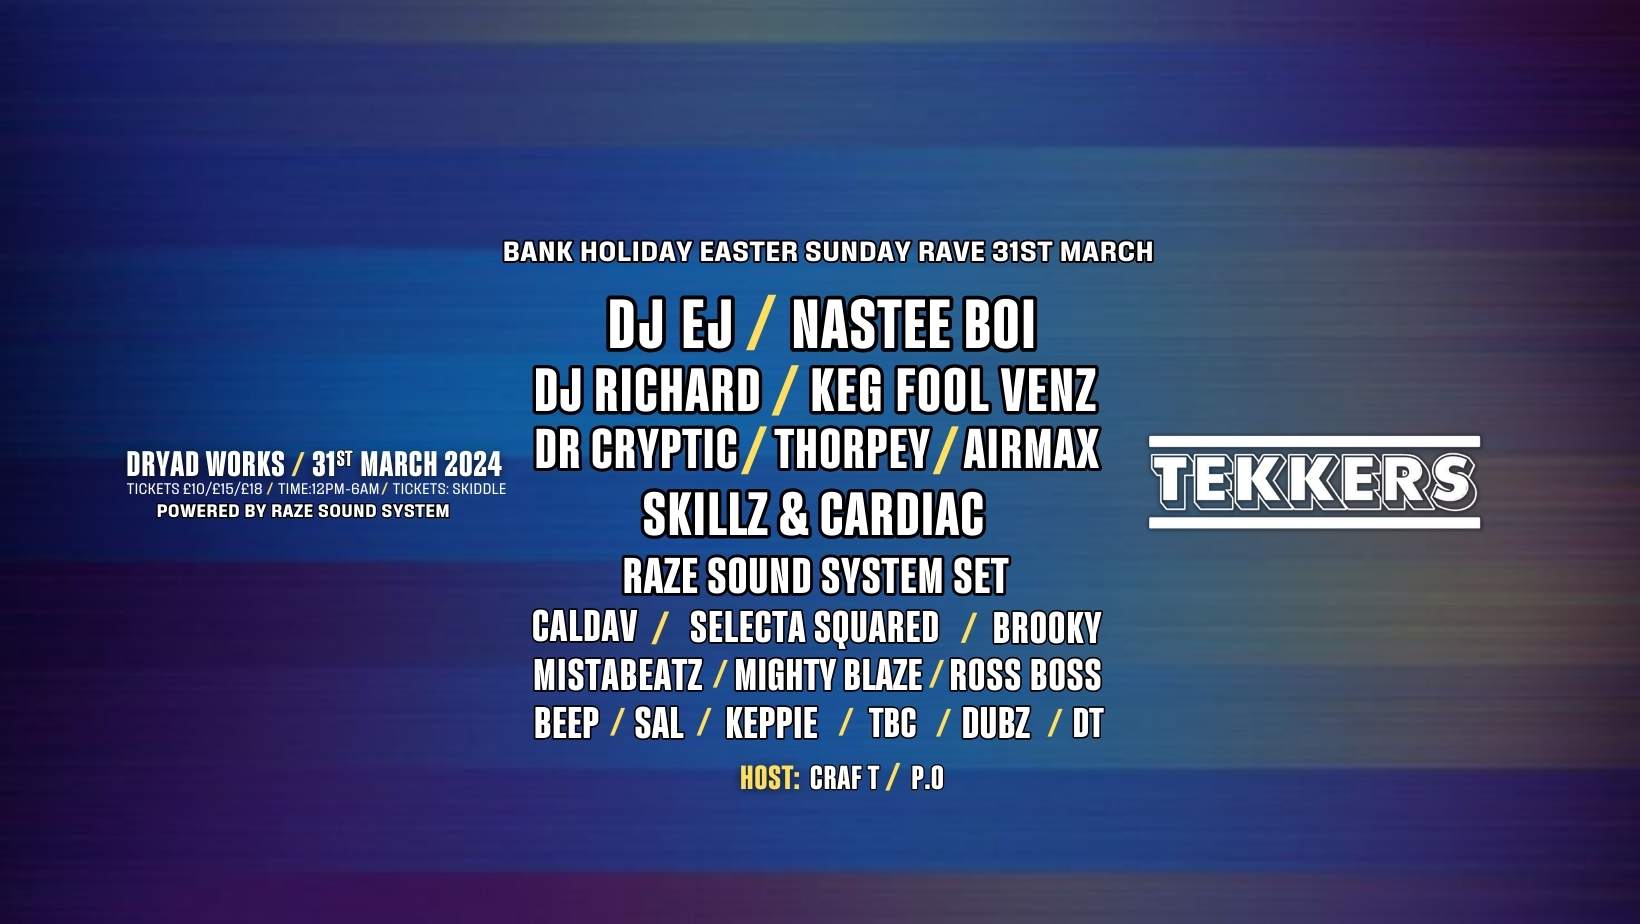 Tekkers Bank Holiday Easter Sunday Rave - フライヤー表